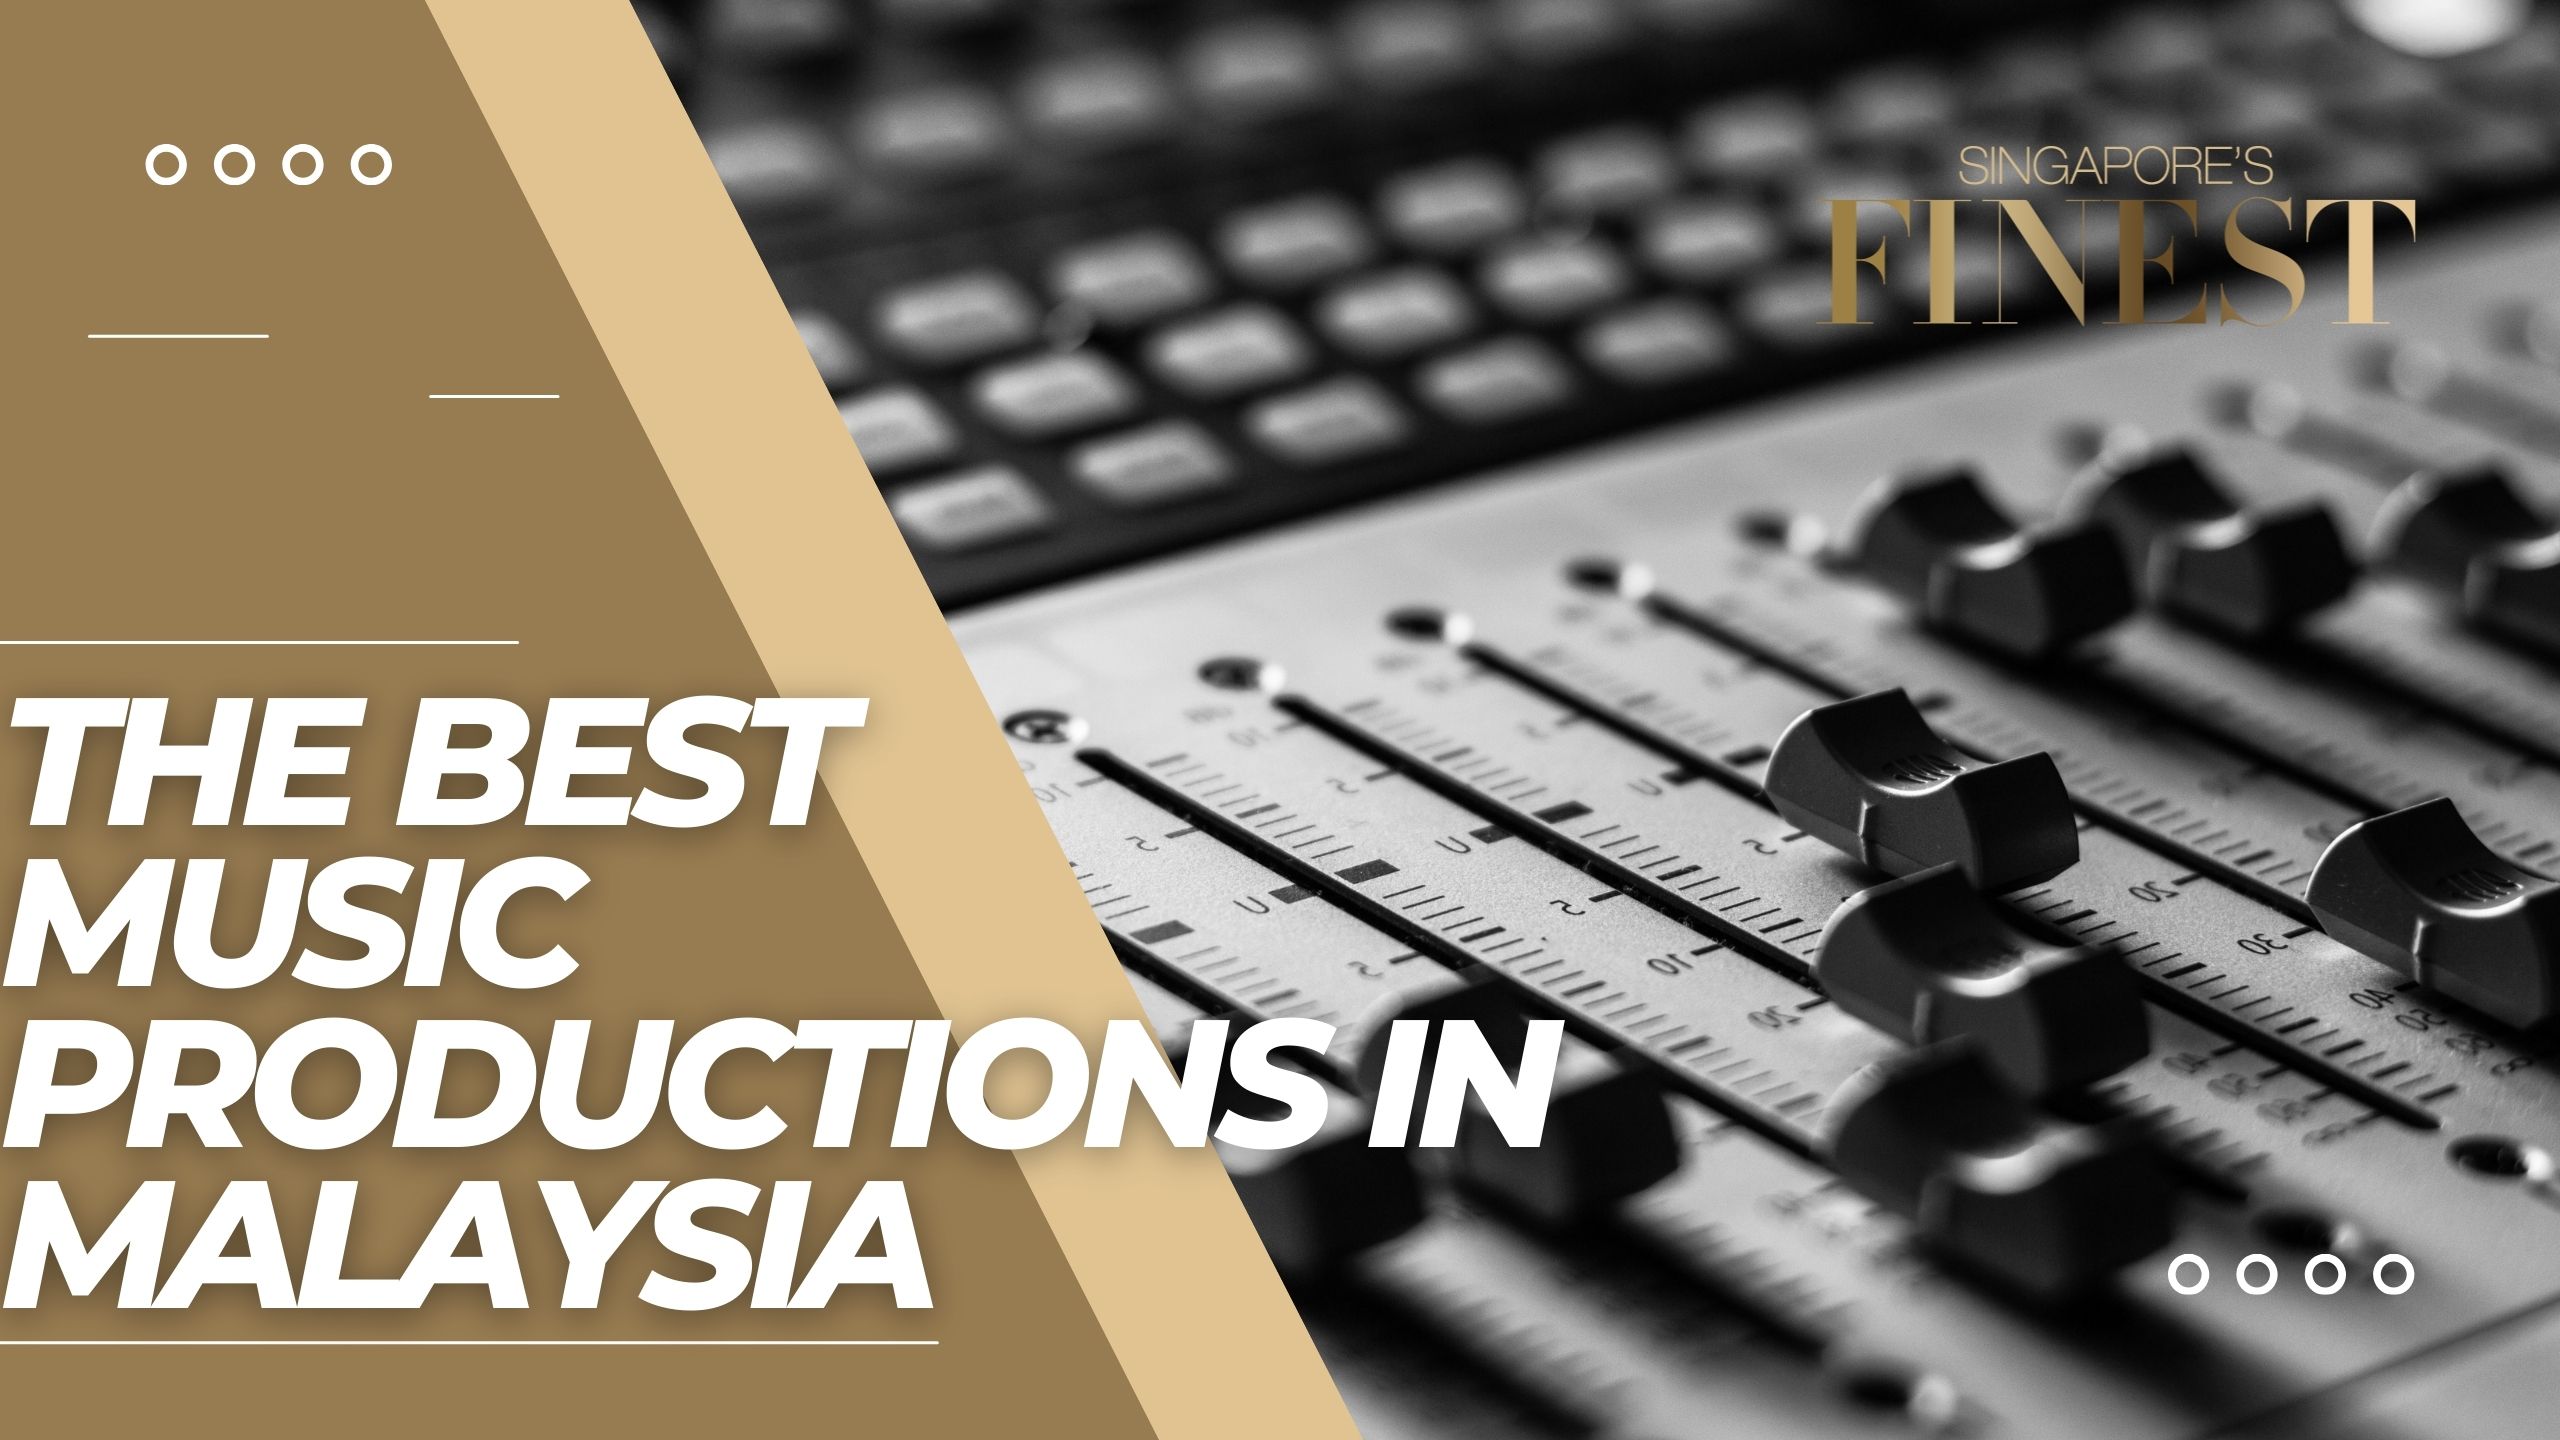 The Finest Music Productions in Malaysia